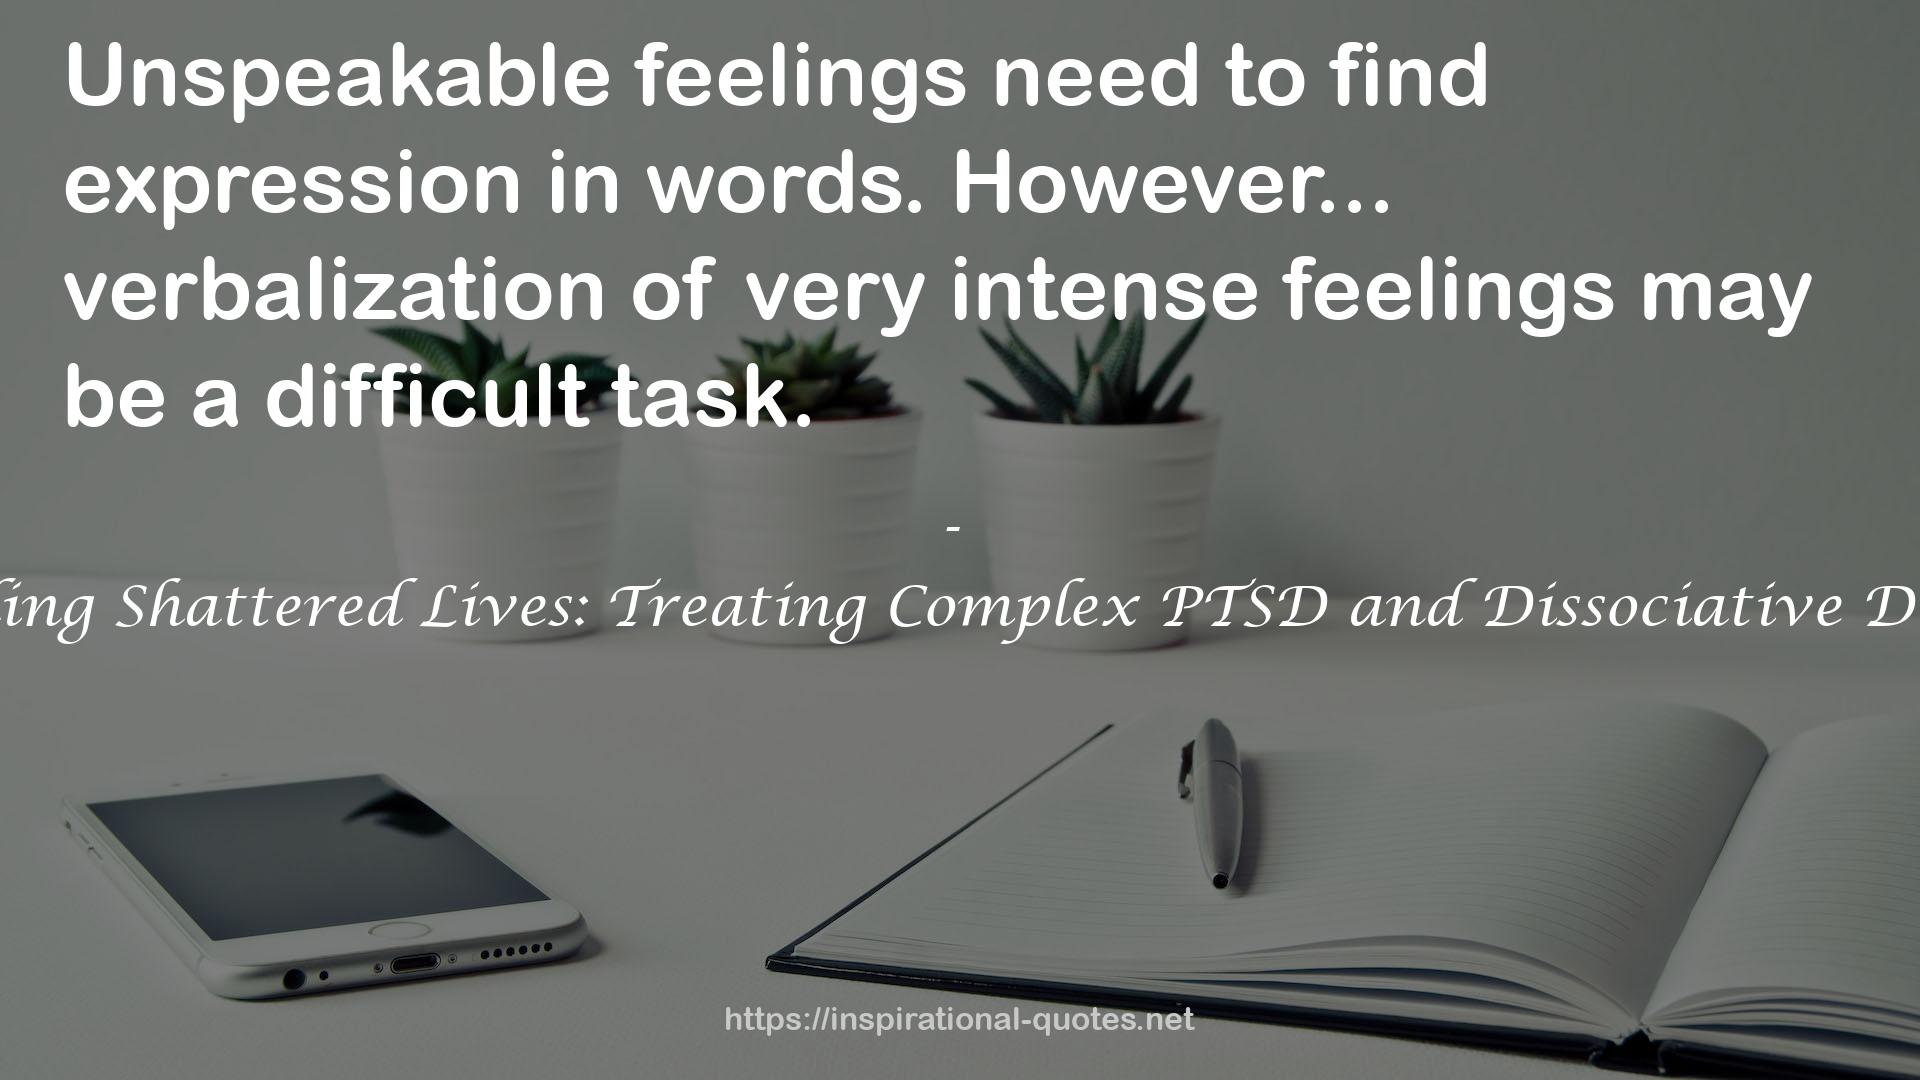 Rebuilding Shattered Lives: Treating Complex PTSD and Dissociative Disorders QUOTES